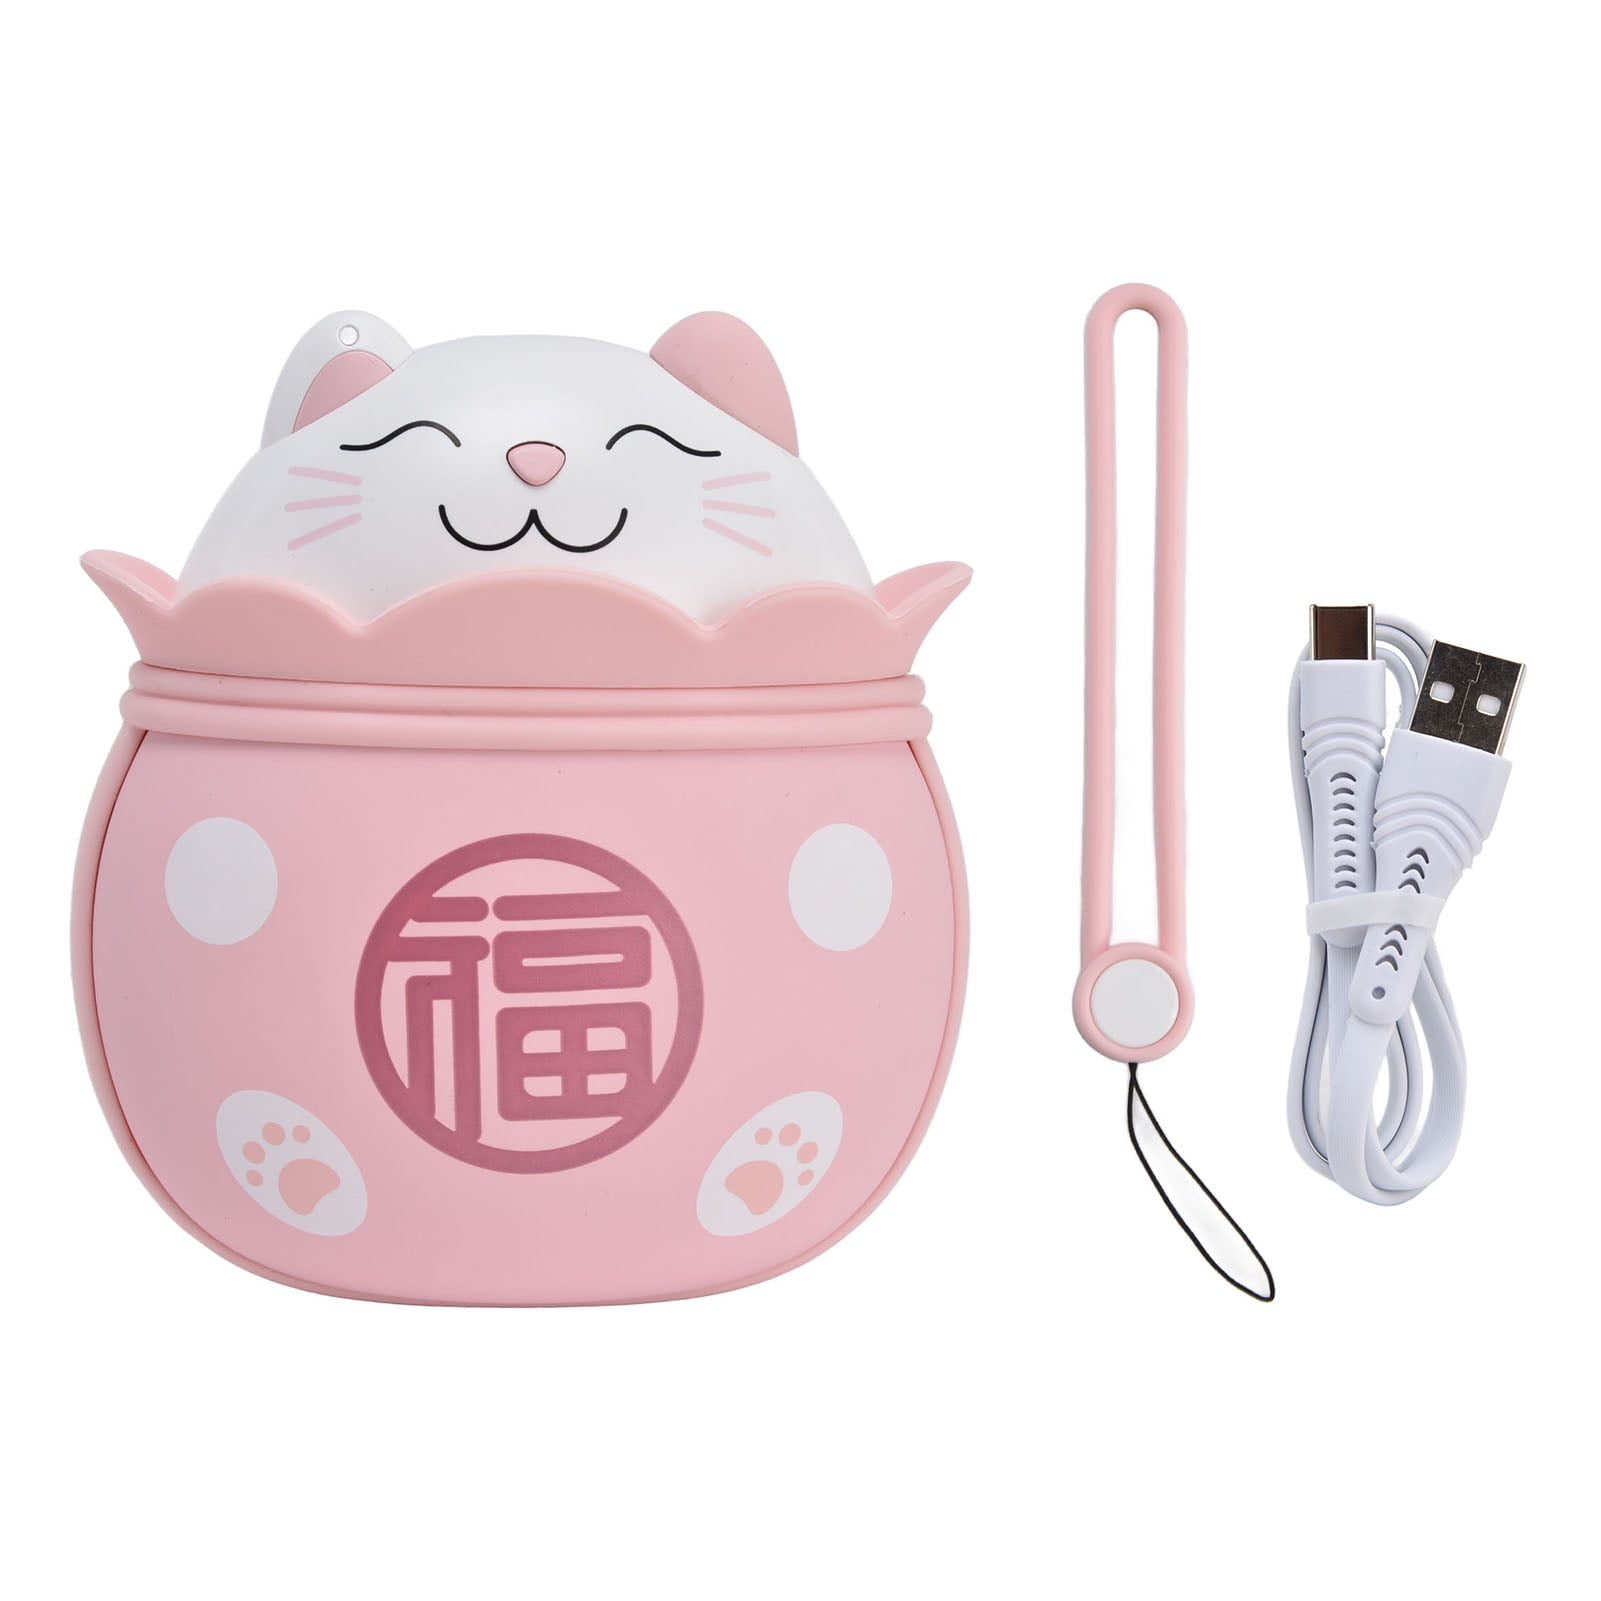 Rechargeable Hand Warmers, Cute Lucky Cat Electric Hand